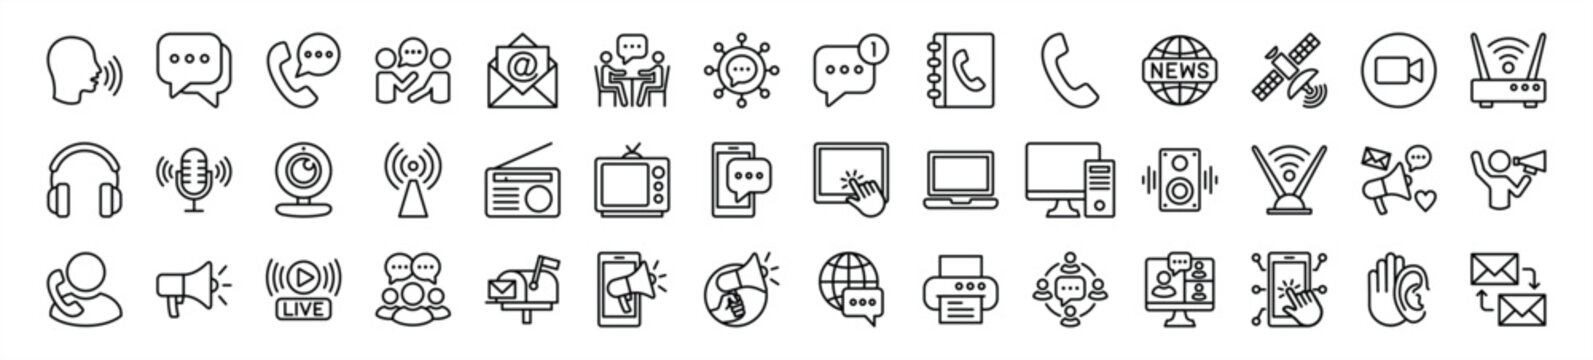 Communication and speaking thin line icon set. Discussion, speech bubble, talking, chat, social media message, conversation, campaign, announce, technology for app and website. Vector illustration